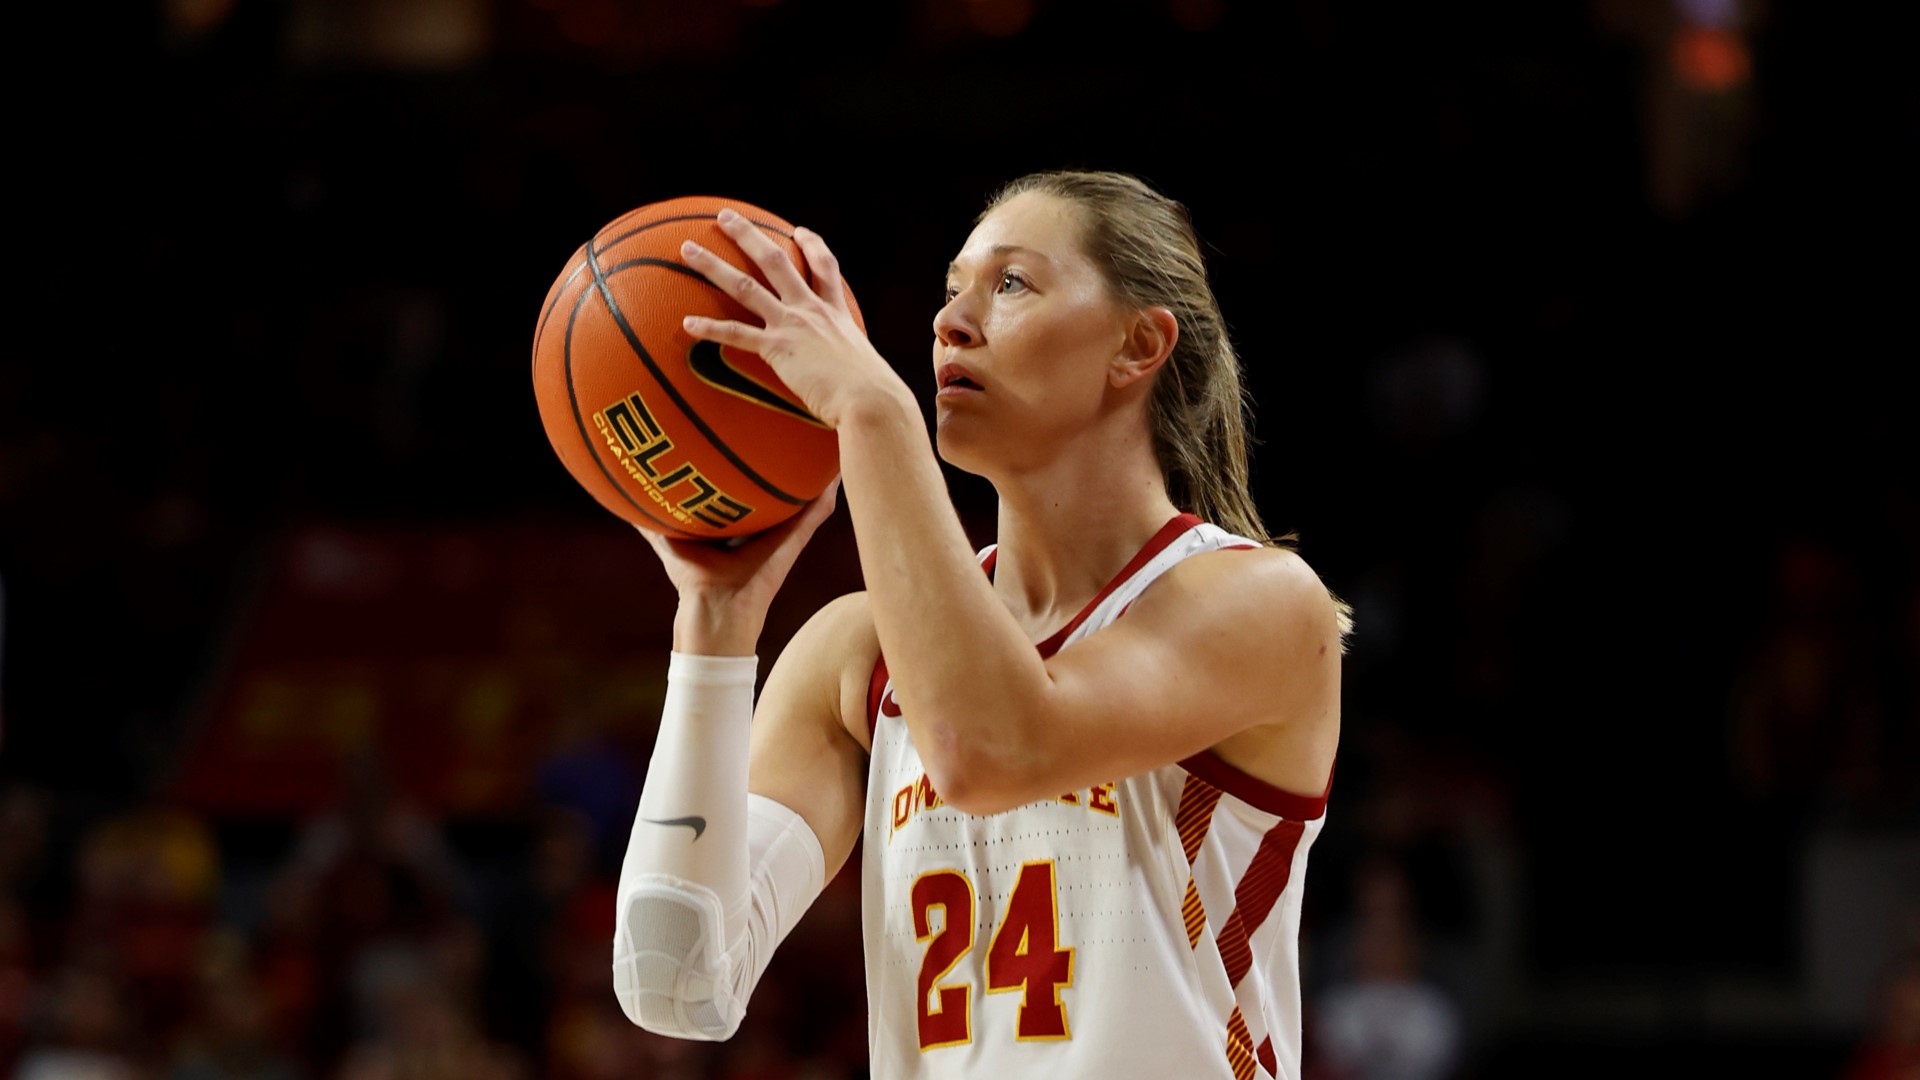 The senior guard averaged 29.5 points per game in the Cyclones two contests last week, including breaking her own three-point record on Wednesday.